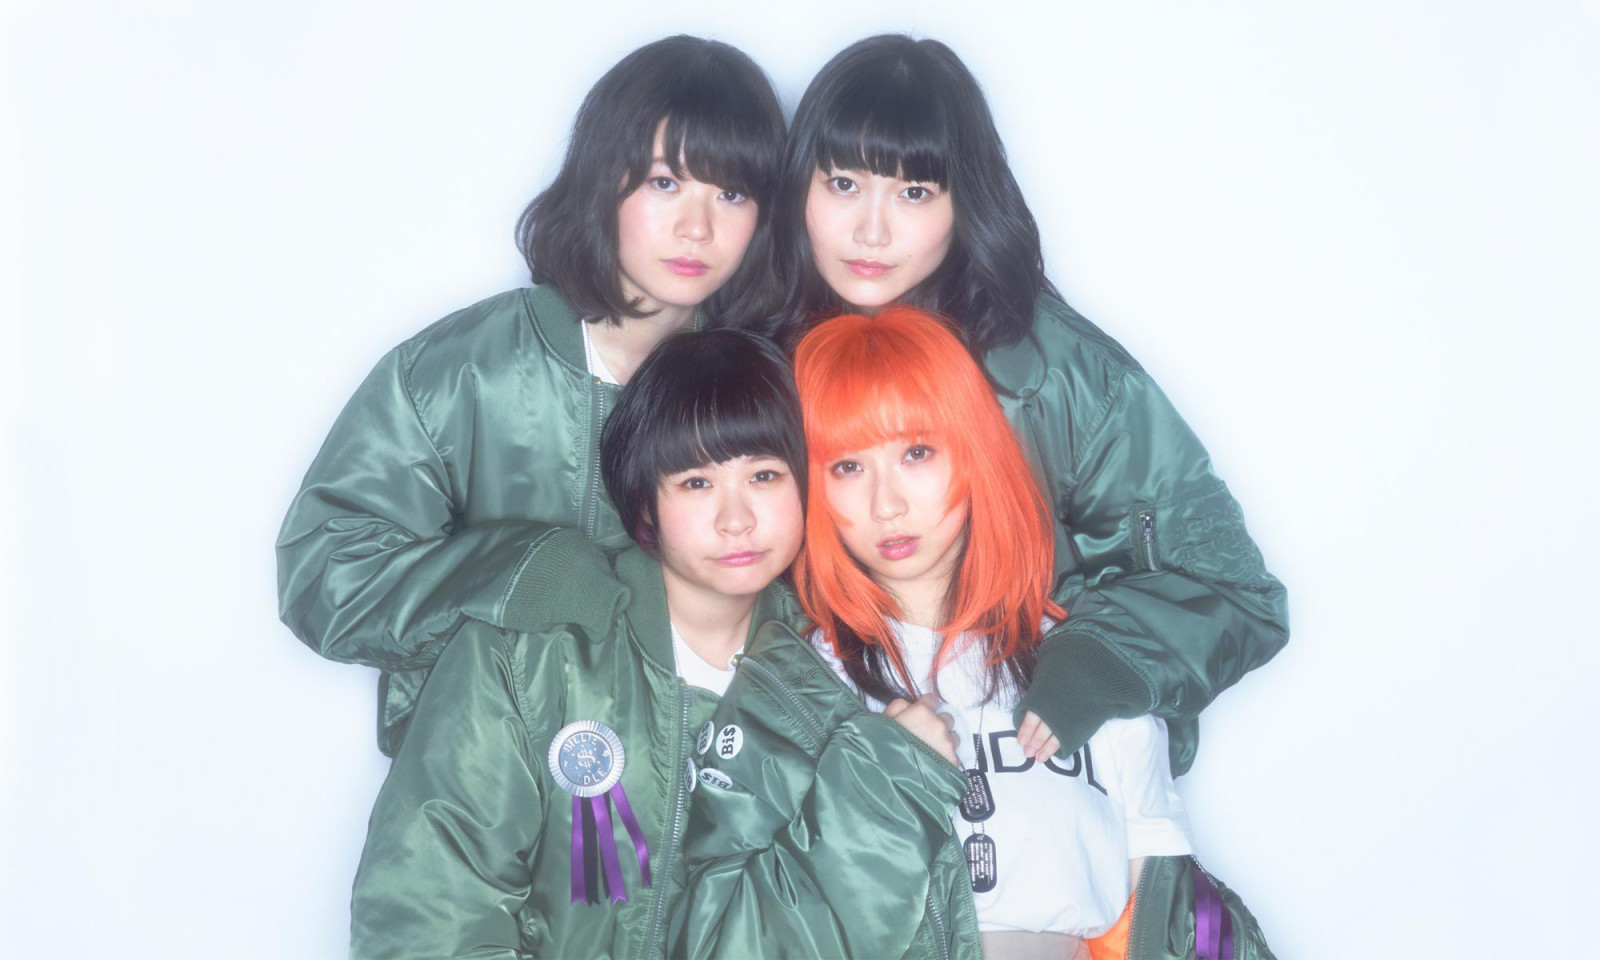 BILLIE IDLE® Want You to be Their Boy! Live Video of “be my boy” From La Foret Museum Released!